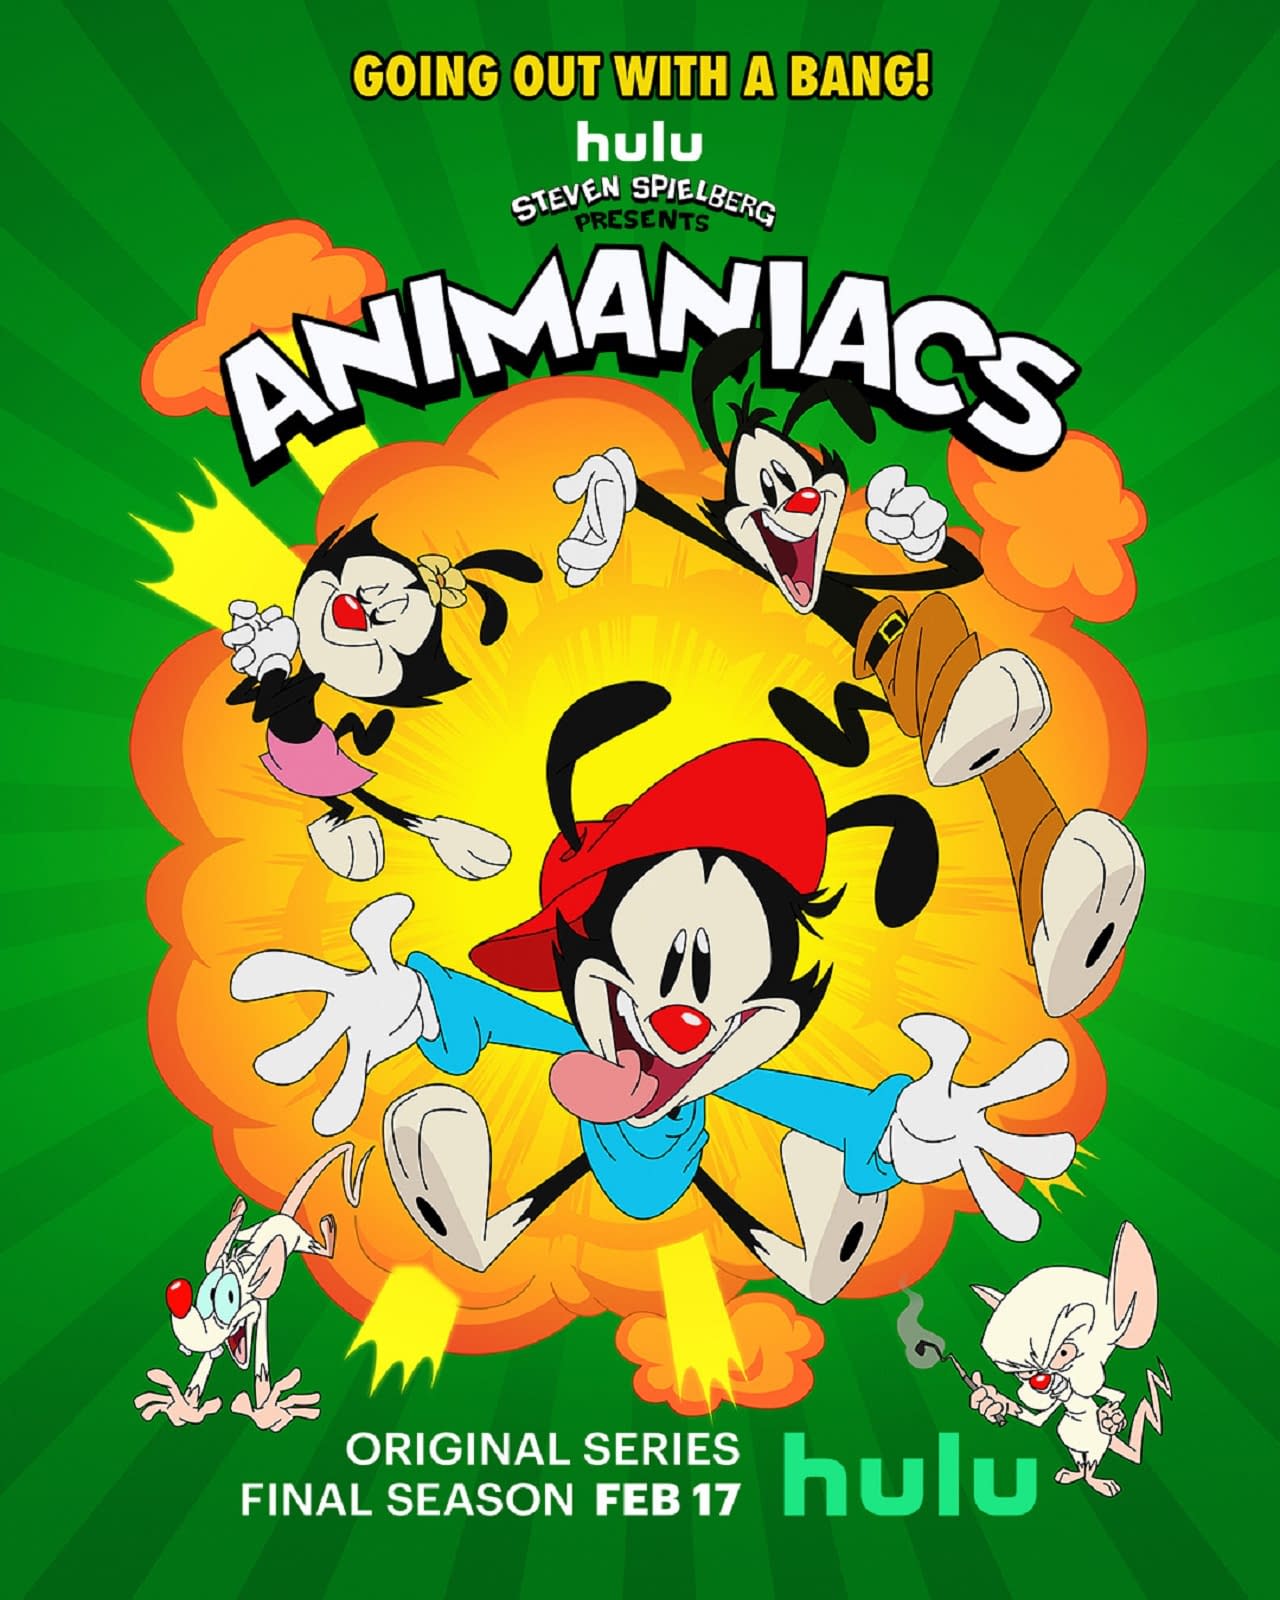 Animaniacs Season 3 Official Trailer The Gang's Going Out With A Bang